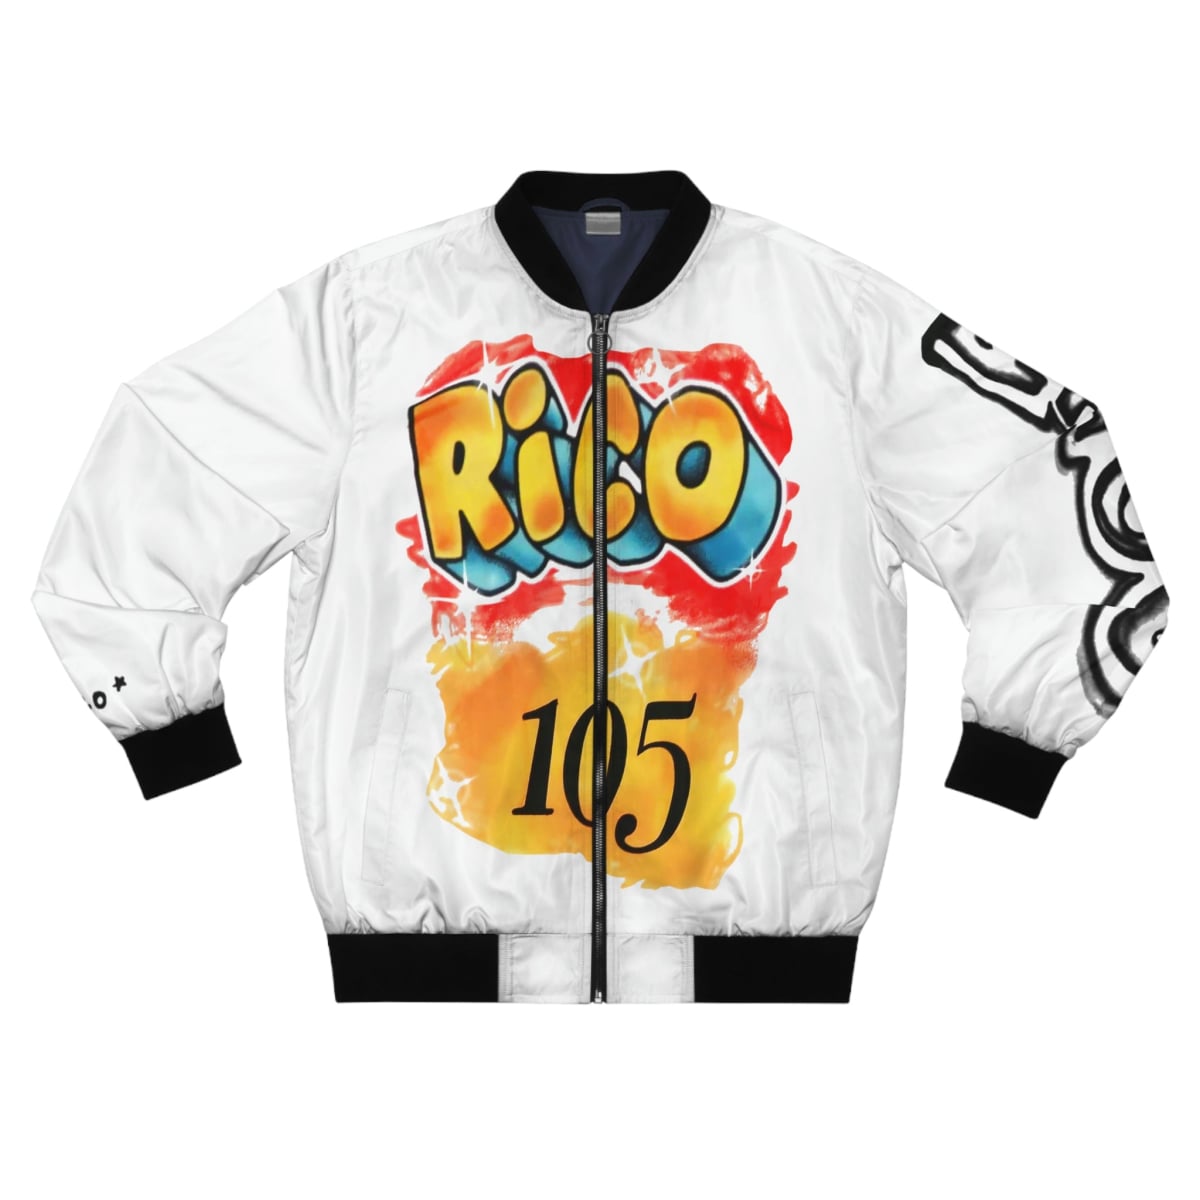 Rico Paid in full Airbrushed Bomber Jacket